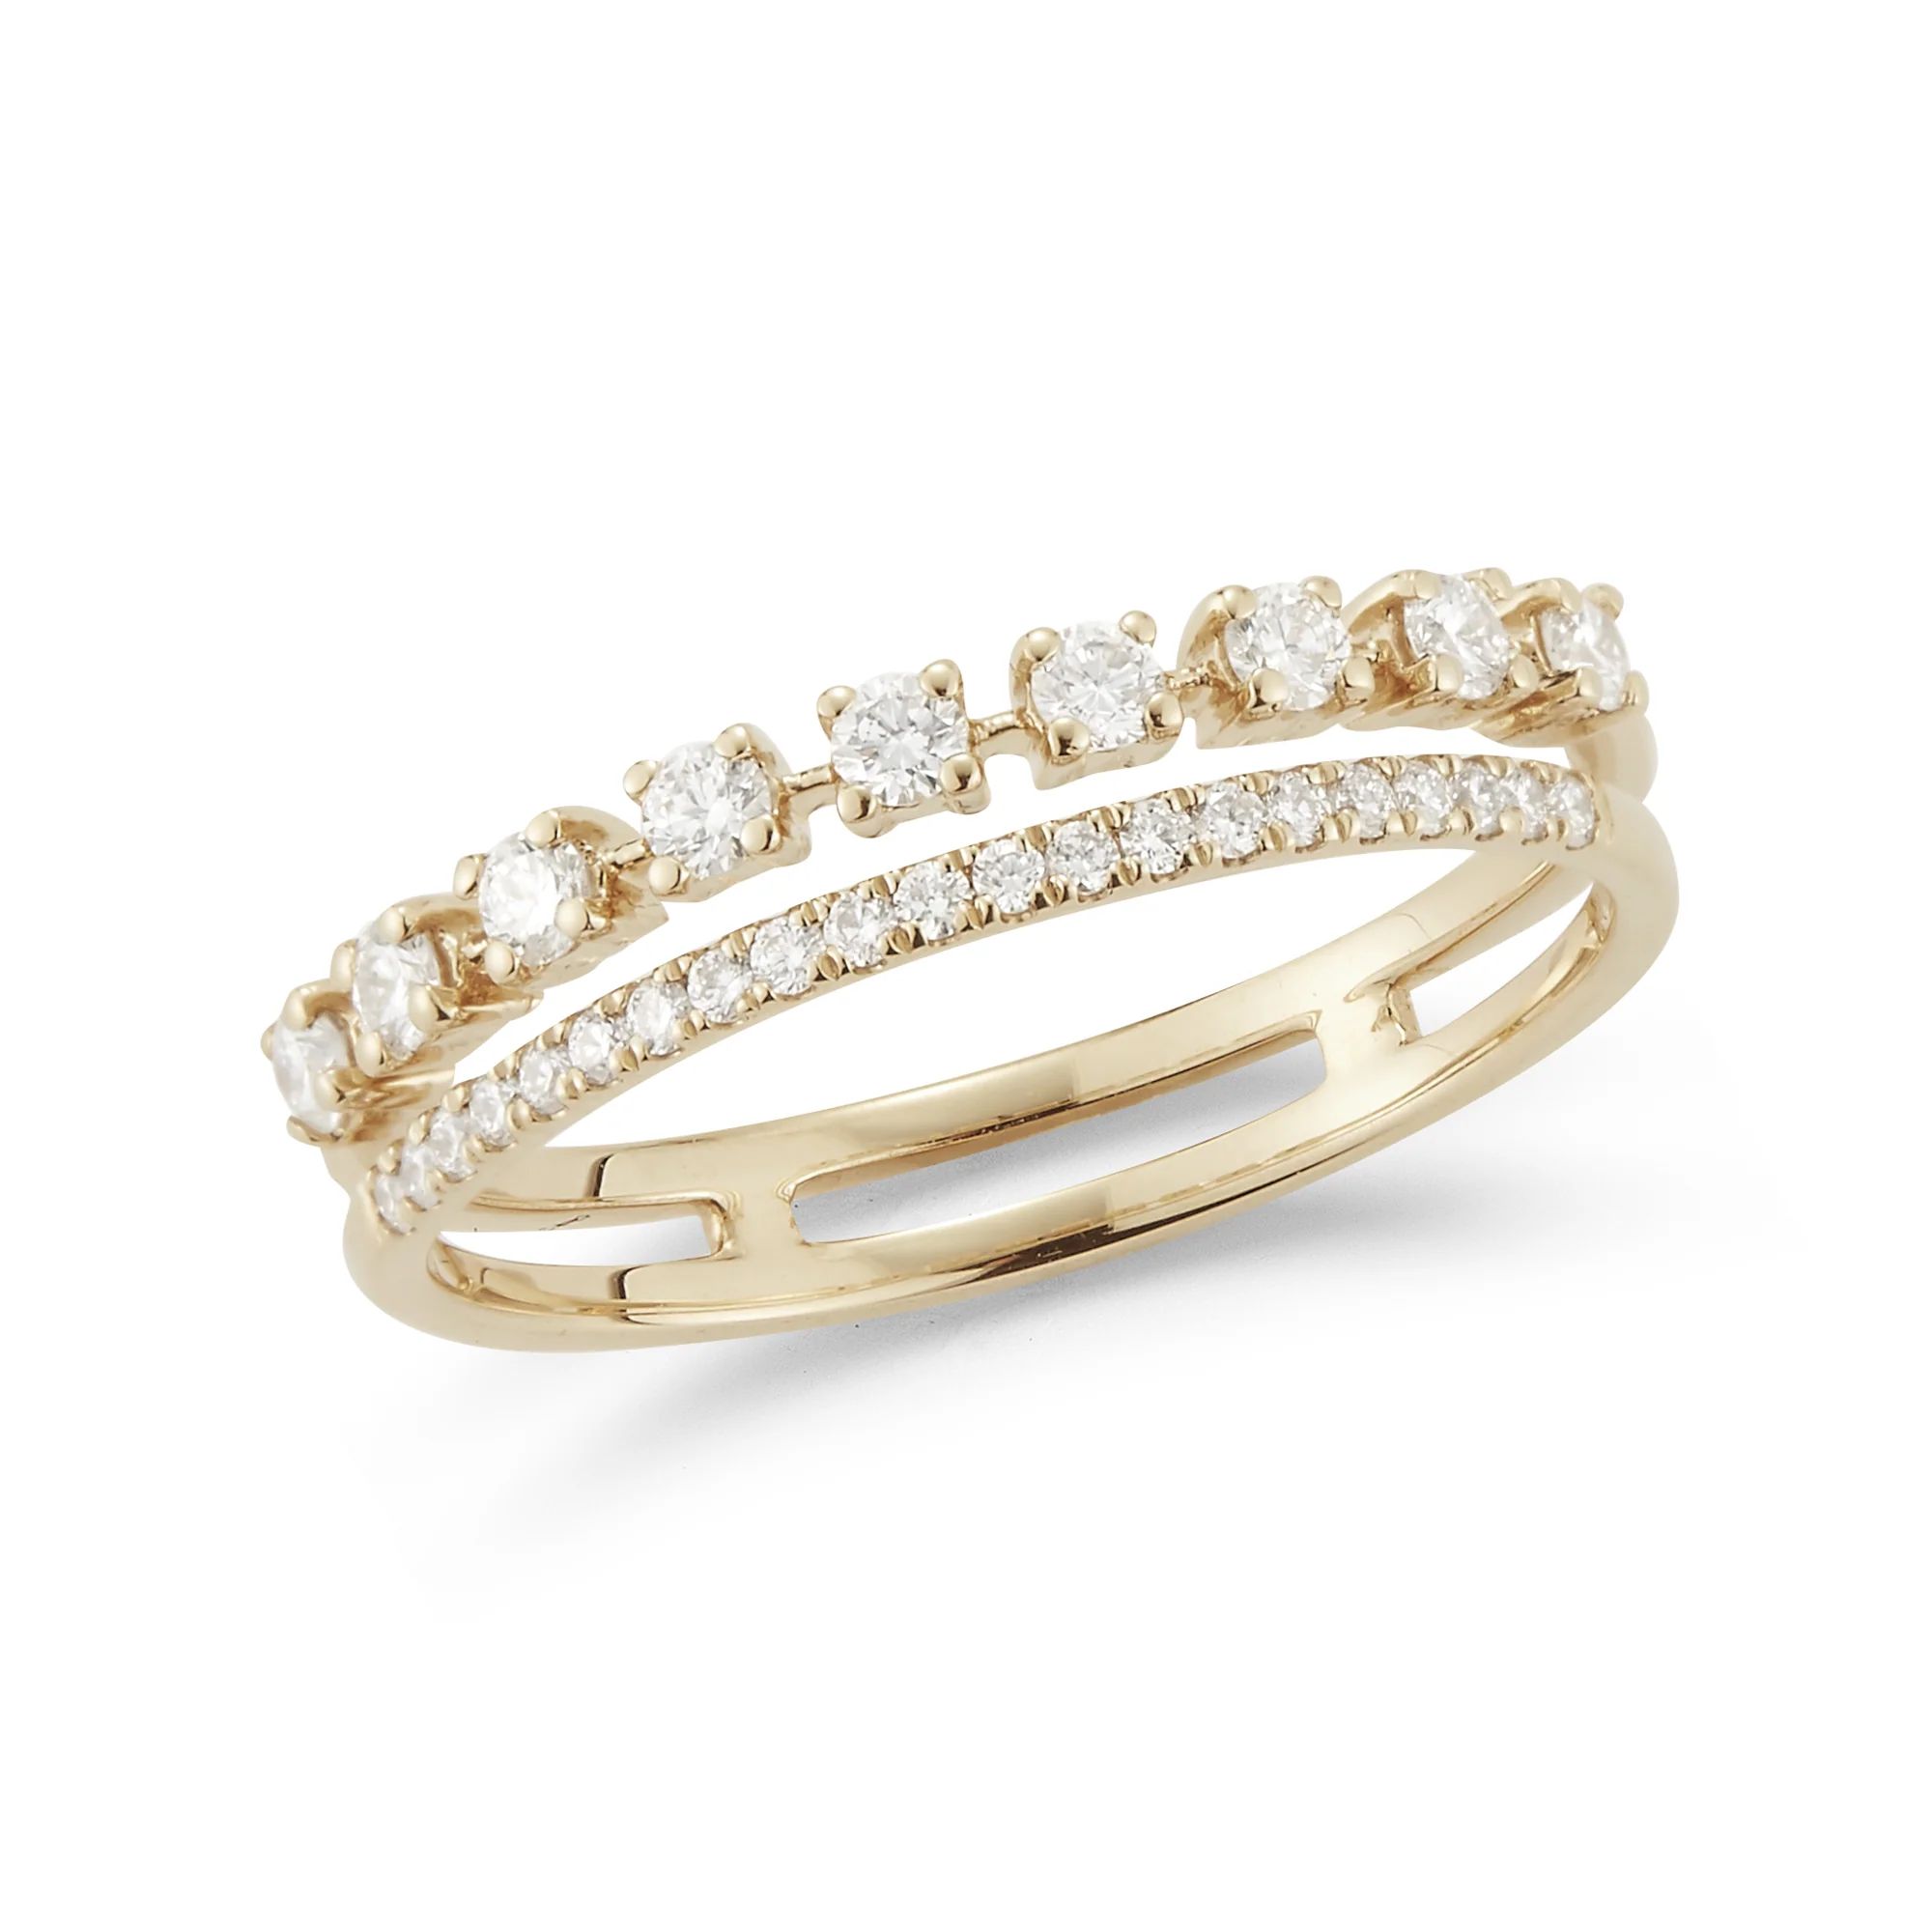 Stackable Rings: Ava Bea Double Row Ring | Dana Rebecca Designs